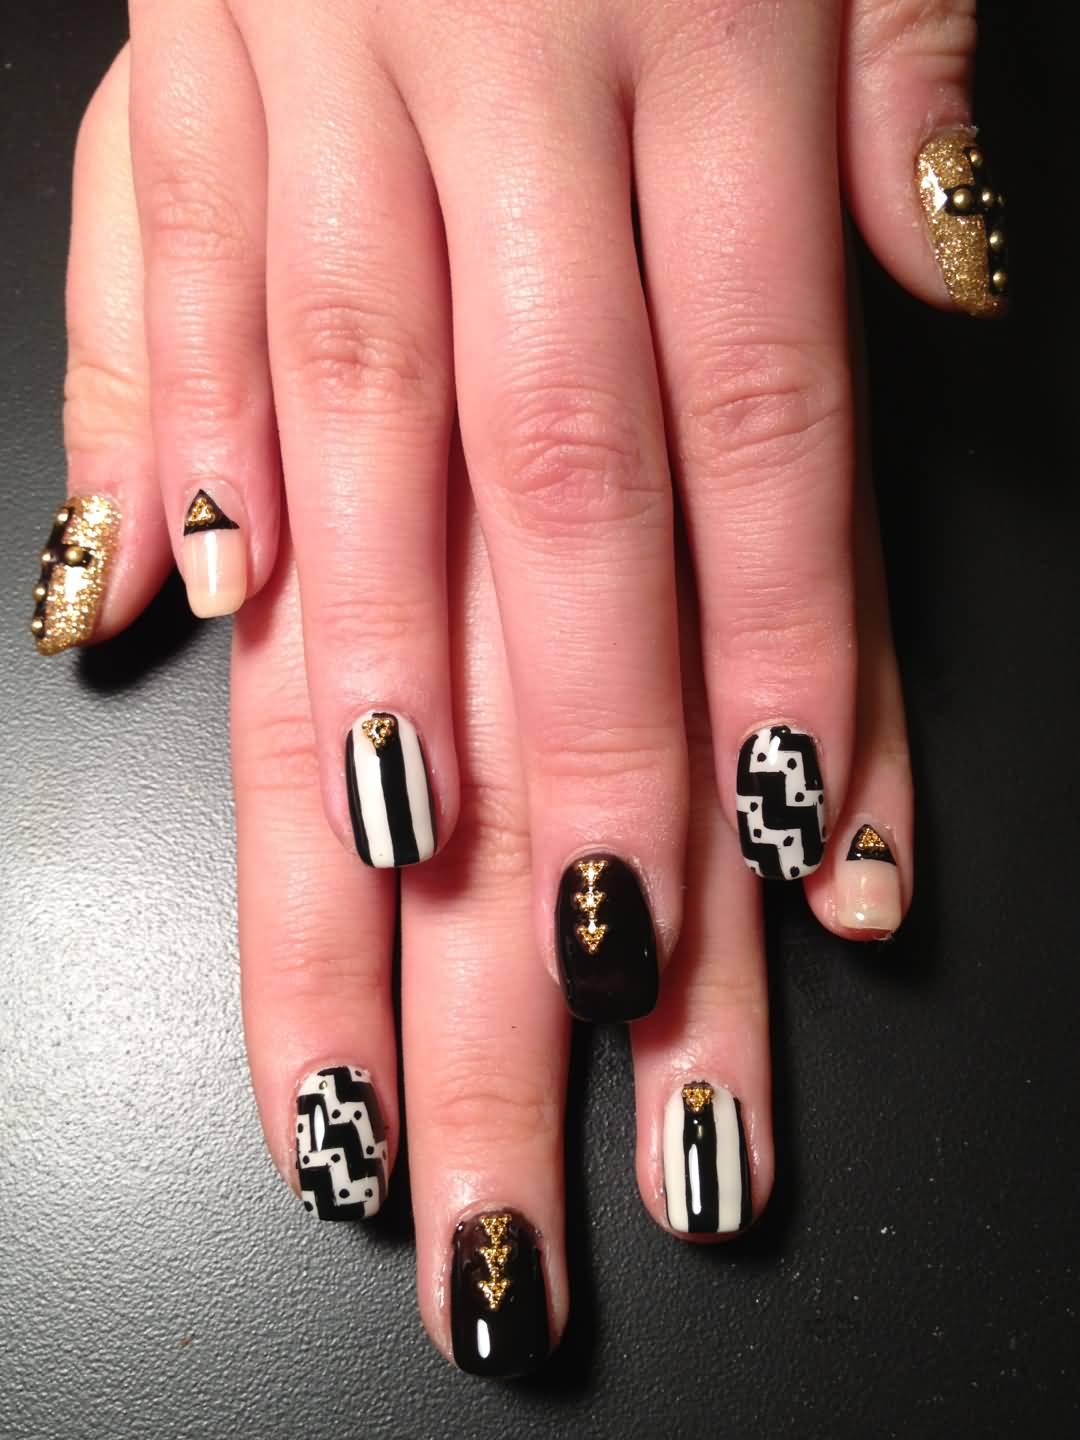 Black And White Geometric Nail Art Design With Studs